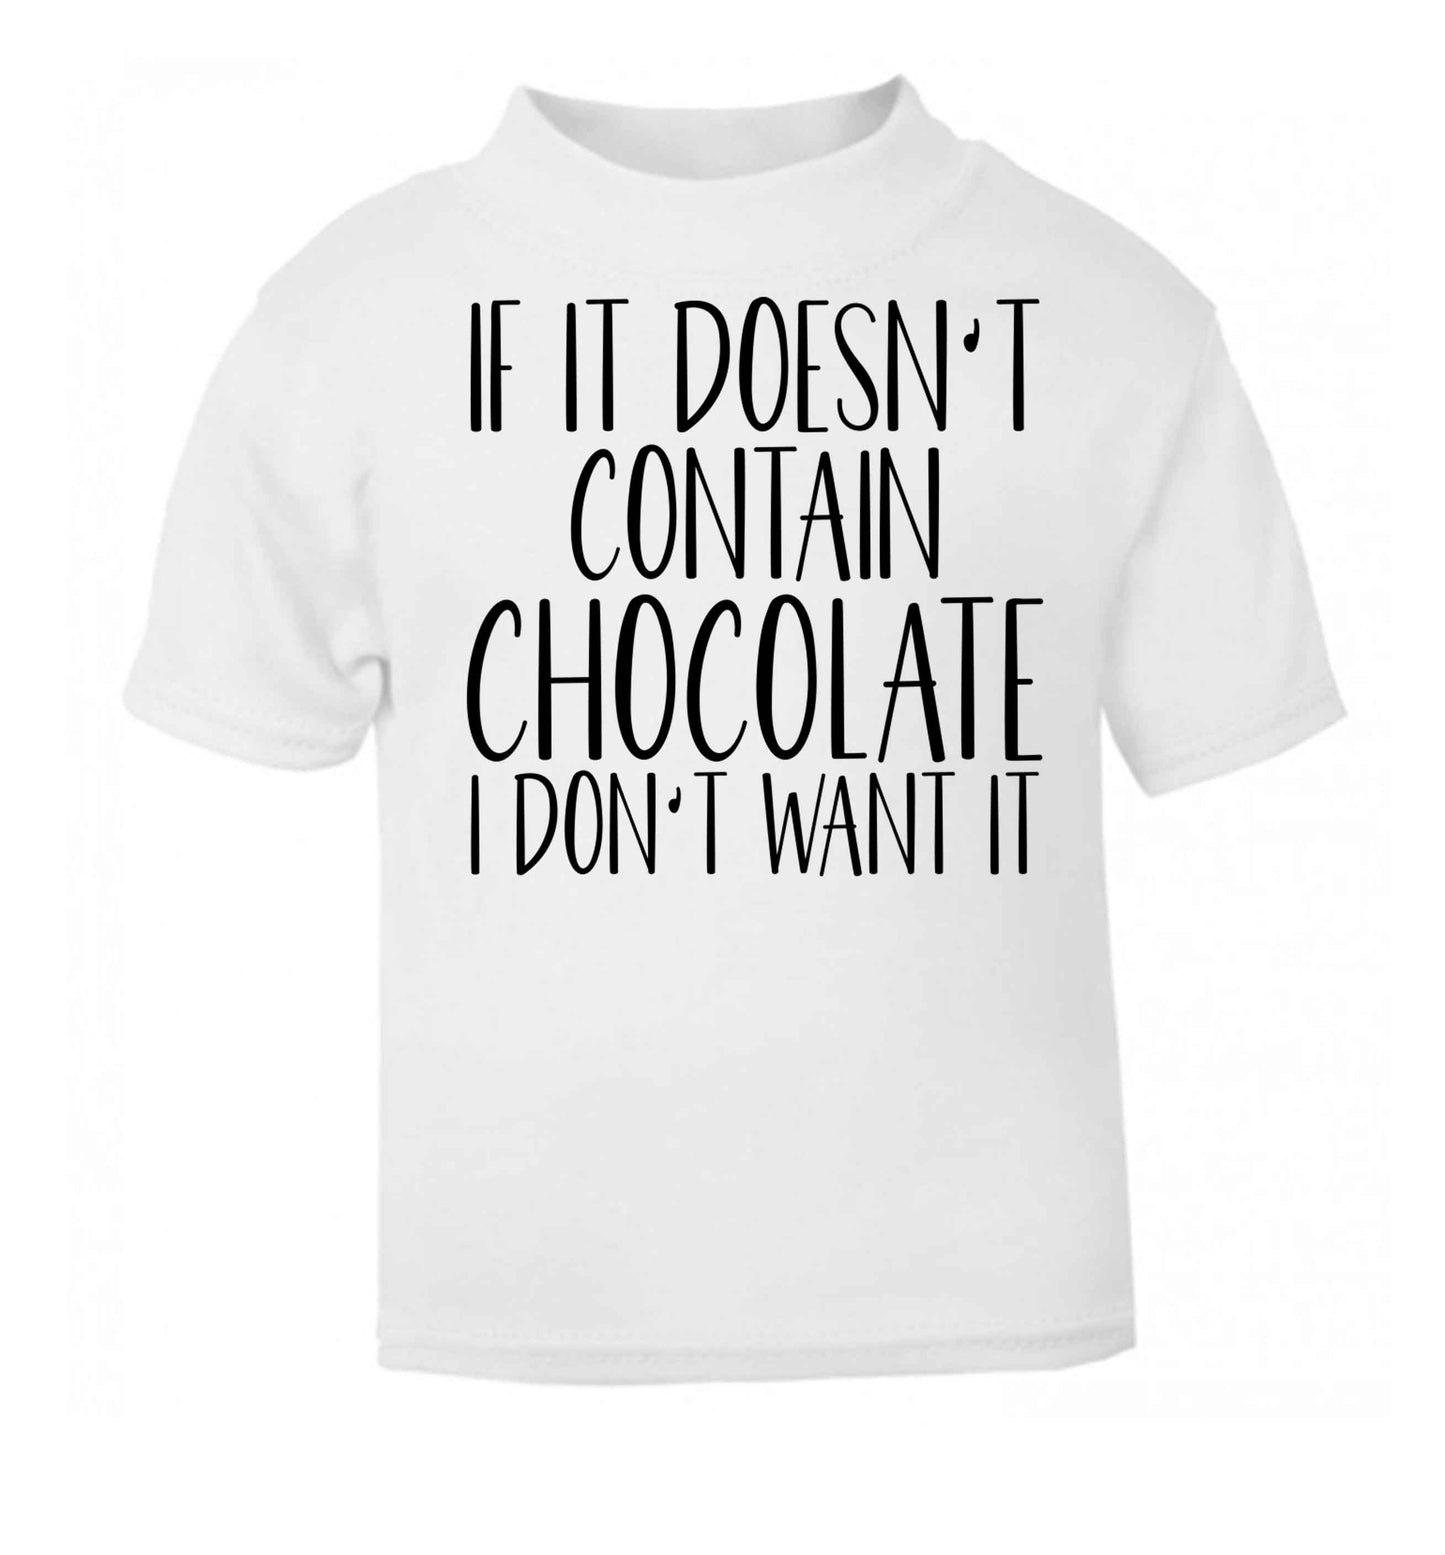 If it doesn't contain chocolate I don't want it white baby toddler Tshirt 2 Years